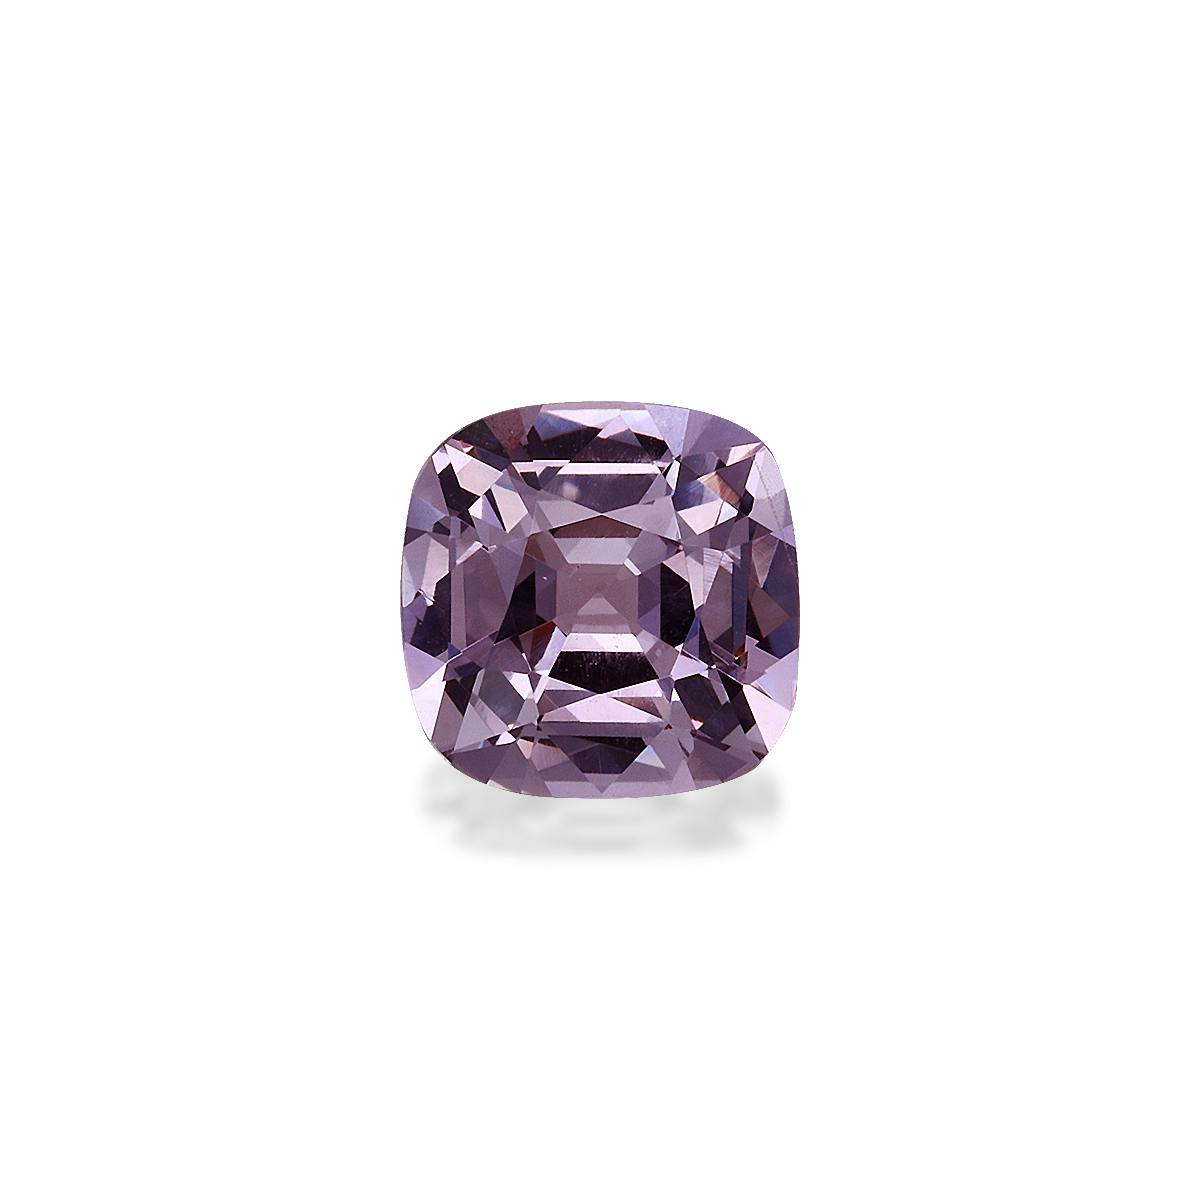 Purple Spinel 1.47ct - 7mm (SP0246)